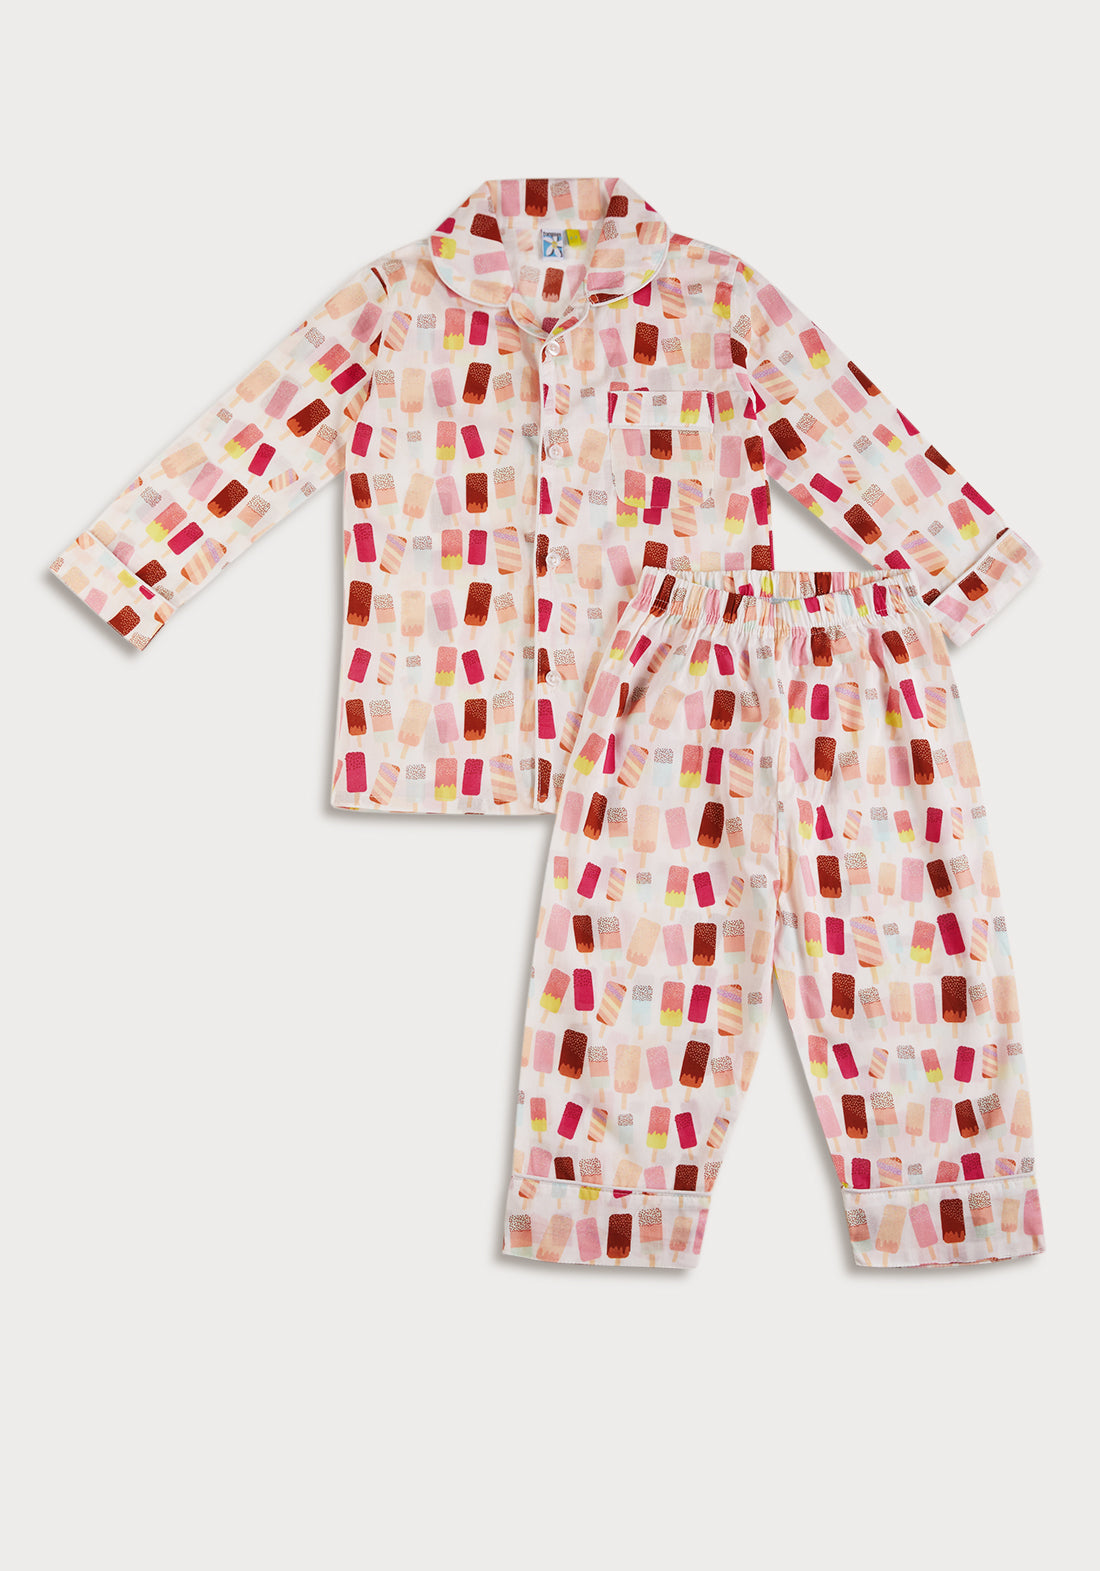 Popsicle Dreams Print Collared Night Wear Set